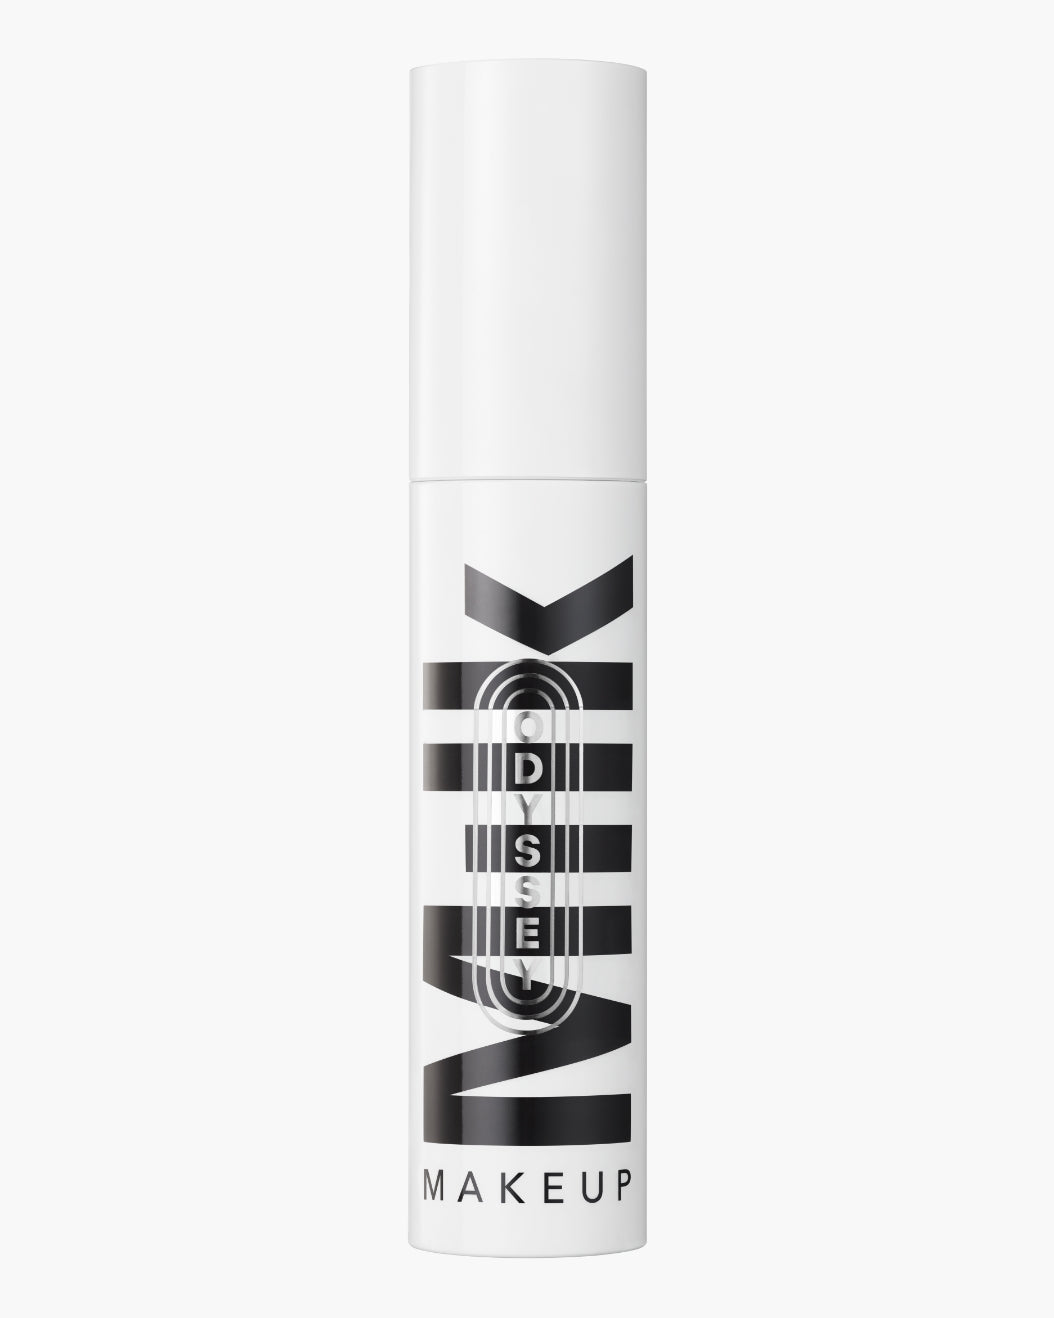 Tube of Milk Makeup Odyssey Lip Oil Gloss in Journey on a white background